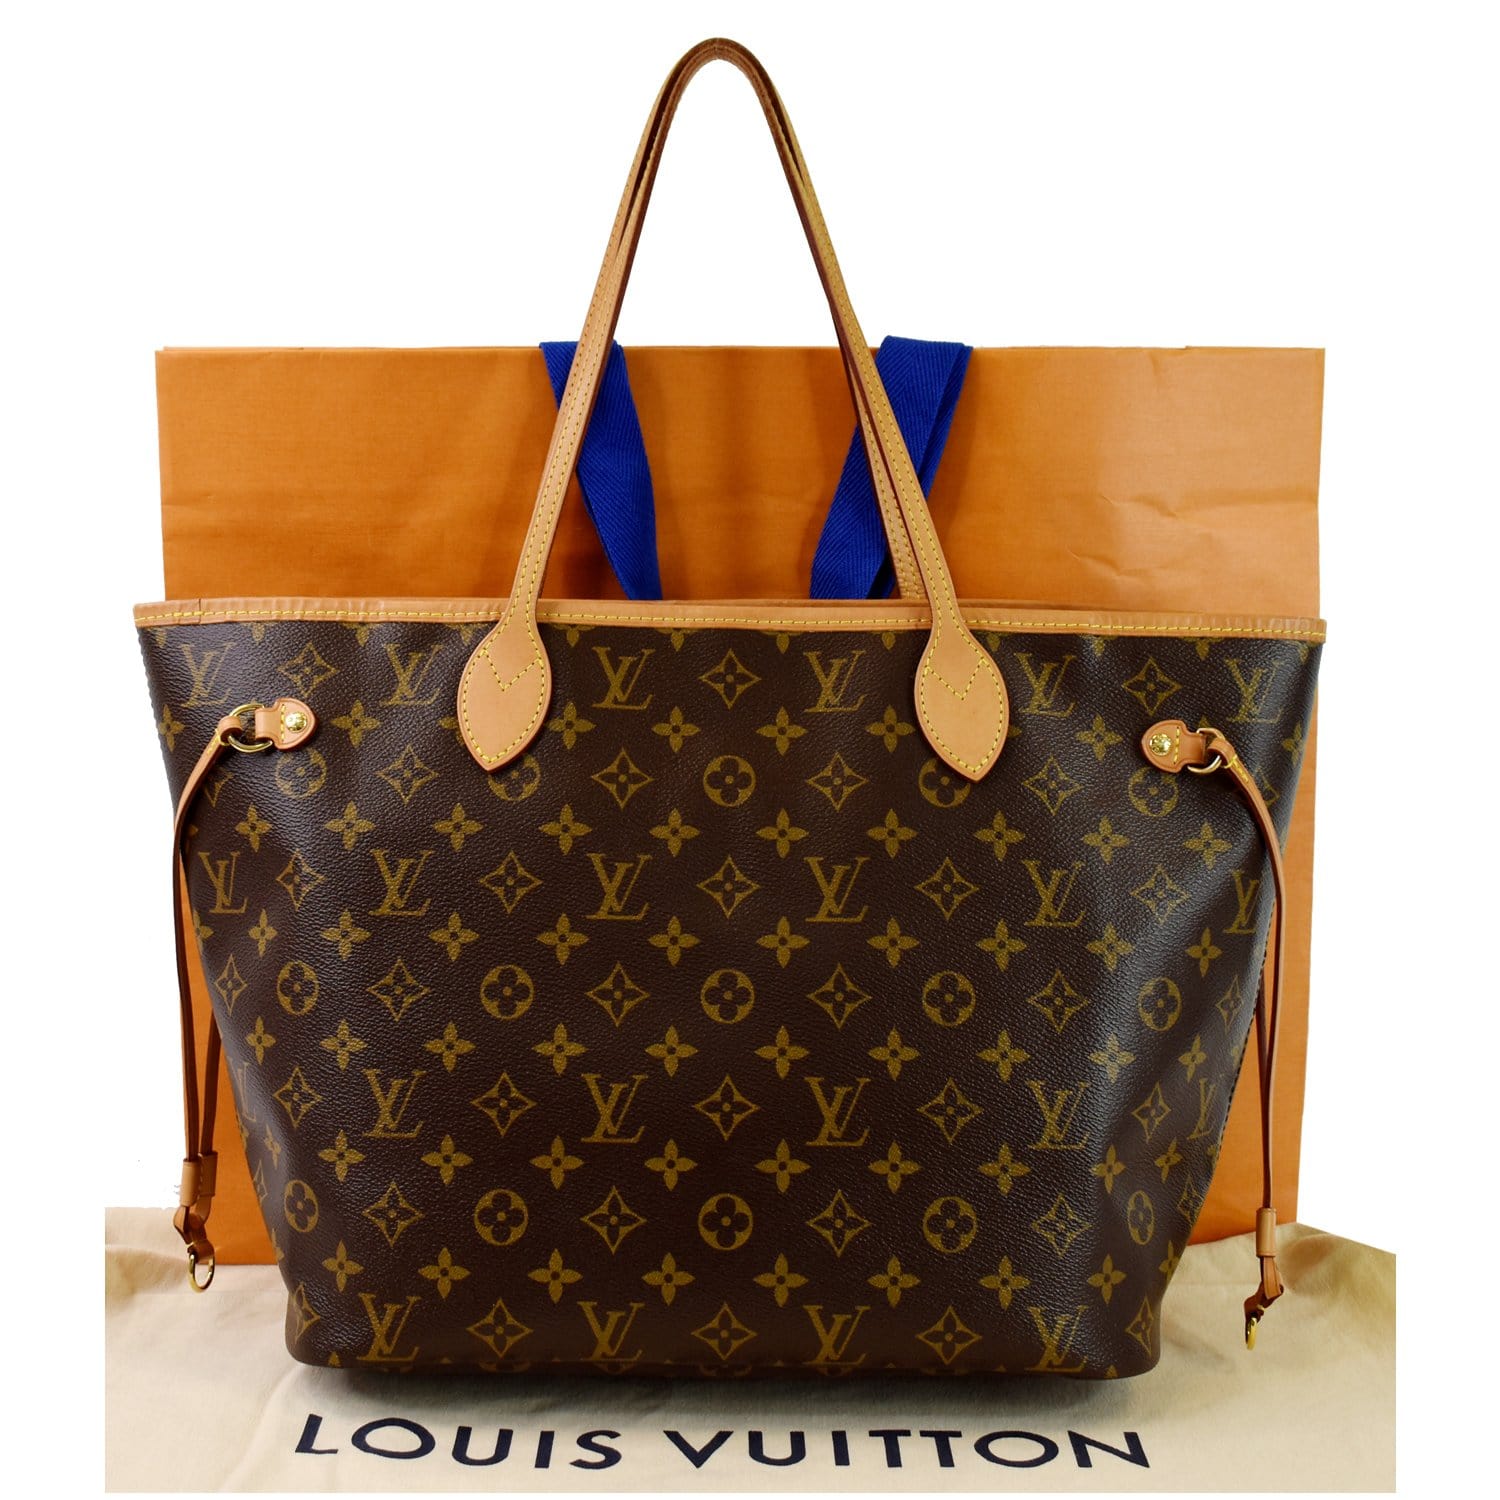 𝘼𝙇𝙋𝘼 on Instagram: “Bought my very first LV bag yesterday I